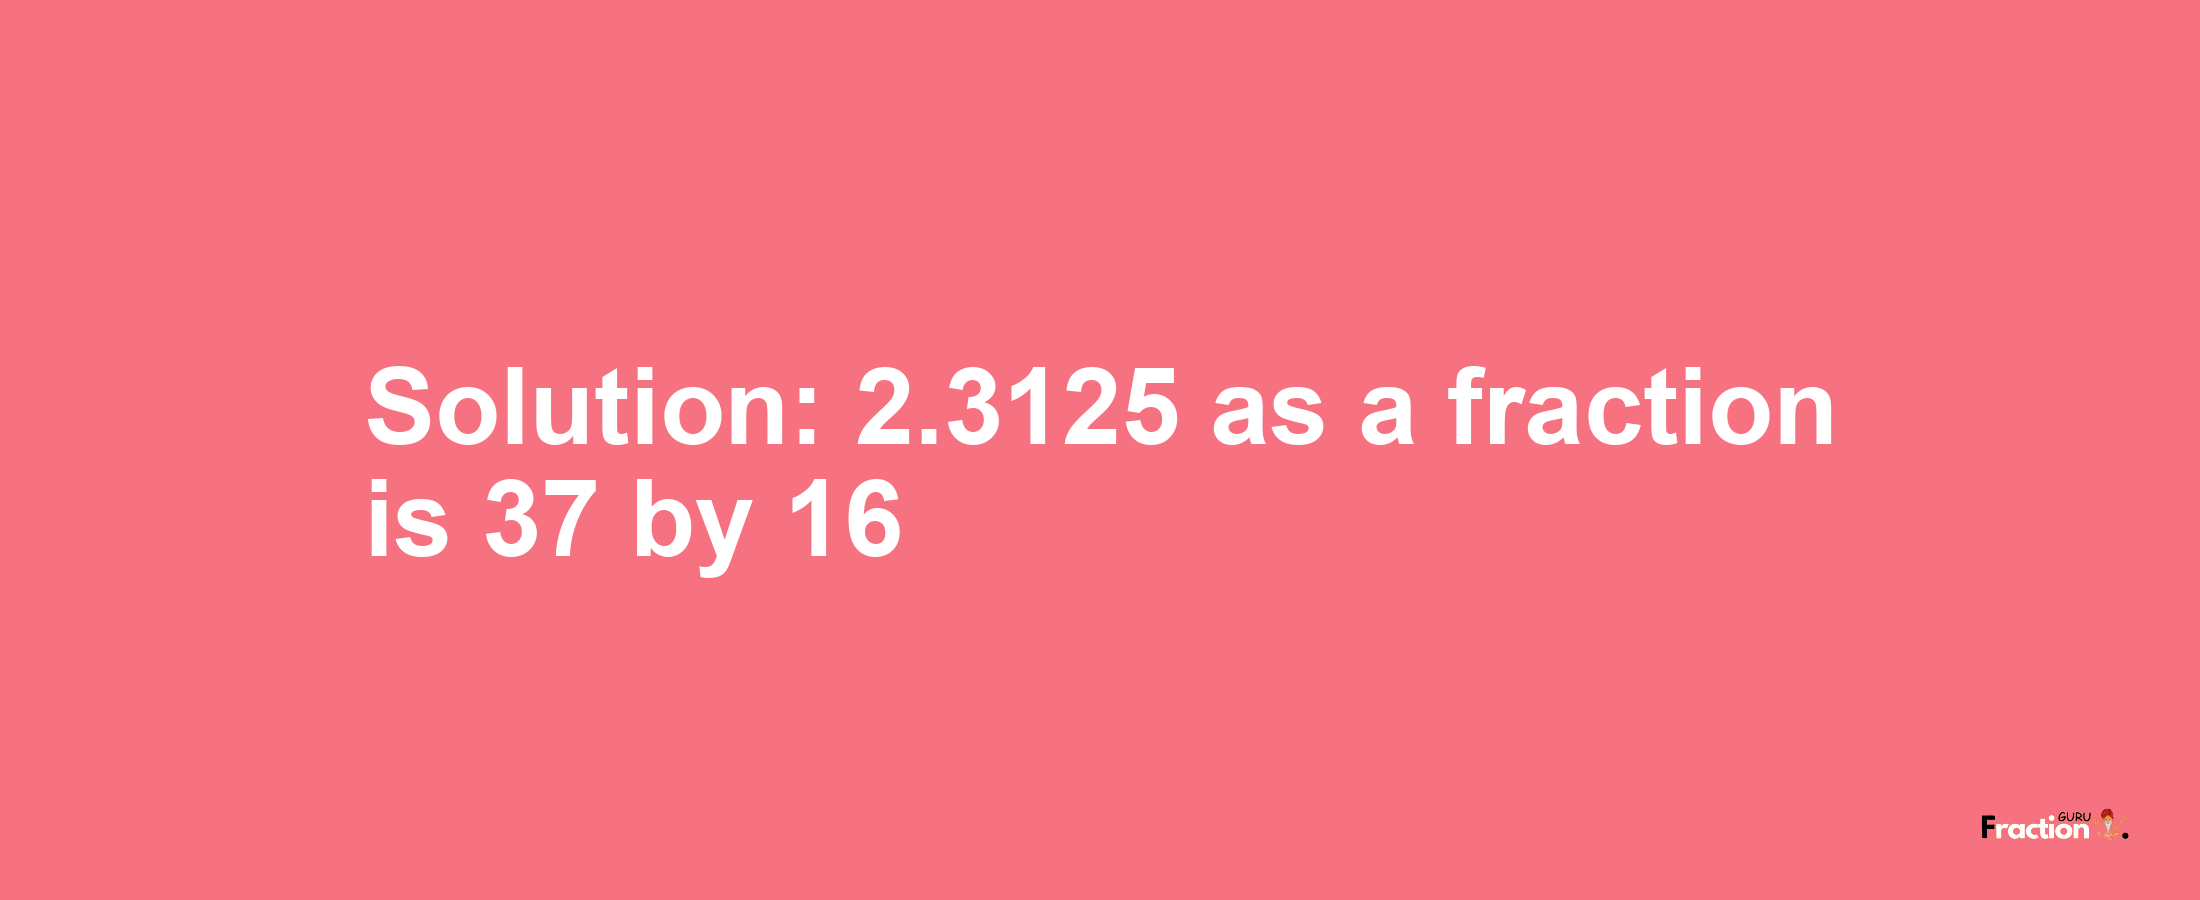 Solution:2.3125 as a fraction is 37/16